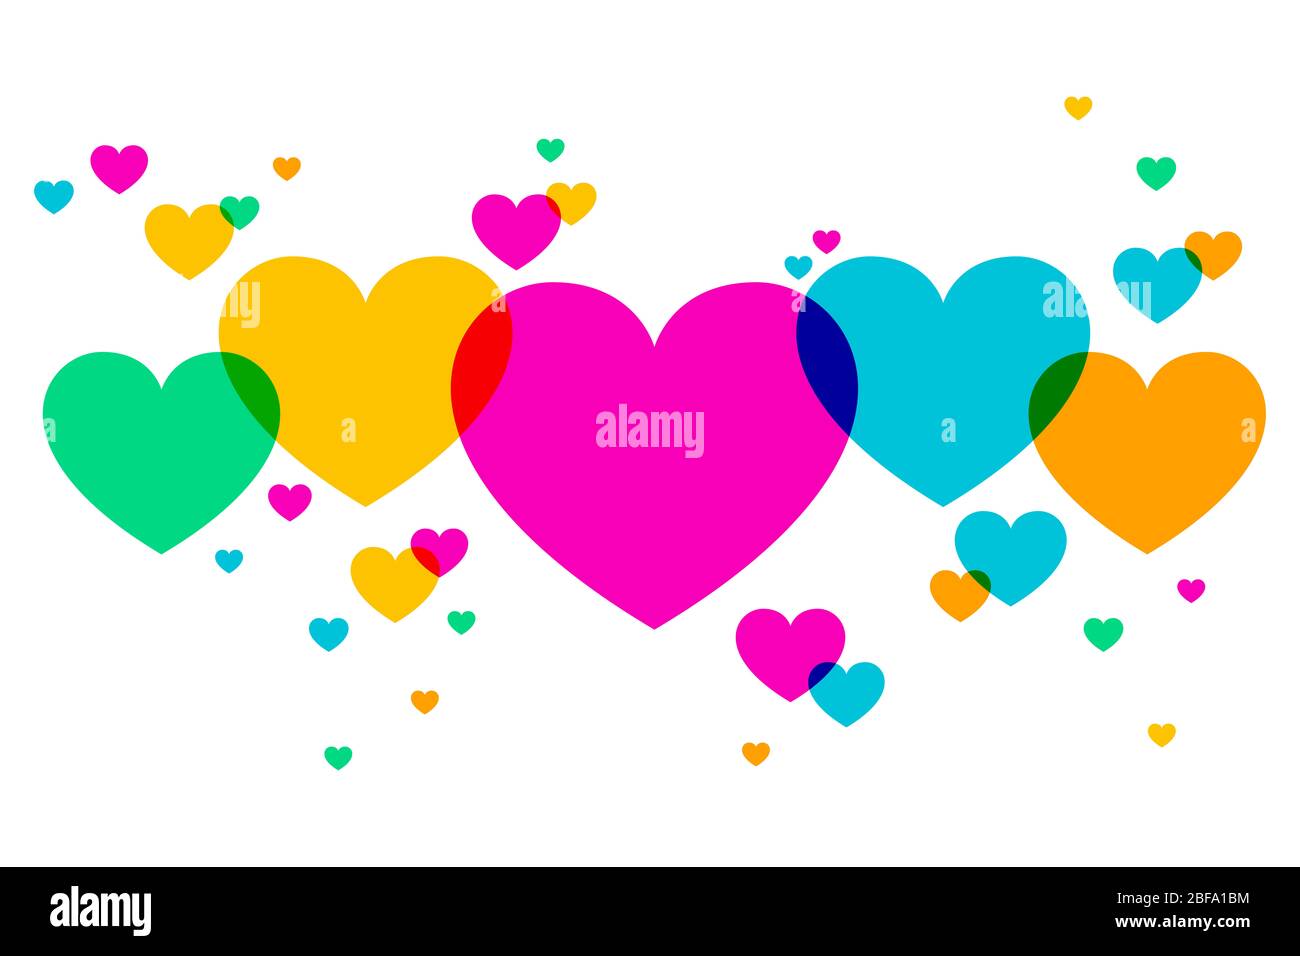 Background made of overlapping multicolored heart shapes. Randomly placed heart symbols to express emotions such as romantic love or joy. Illustration Stock Photo